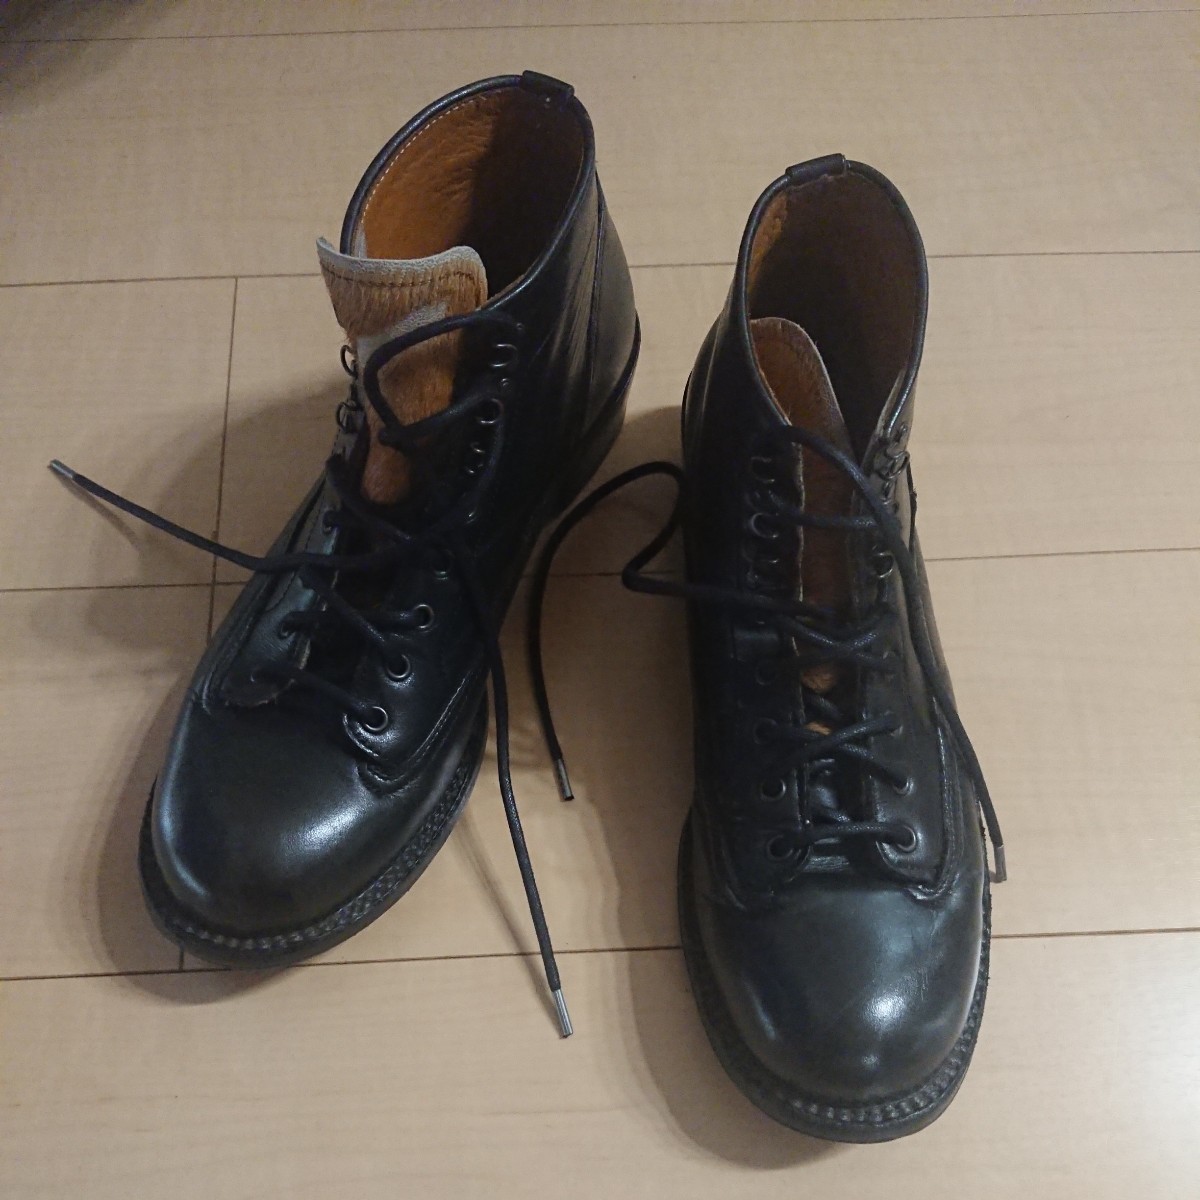 rolling dub trio low ring Dub Trio boots leather shoes 7 25cm